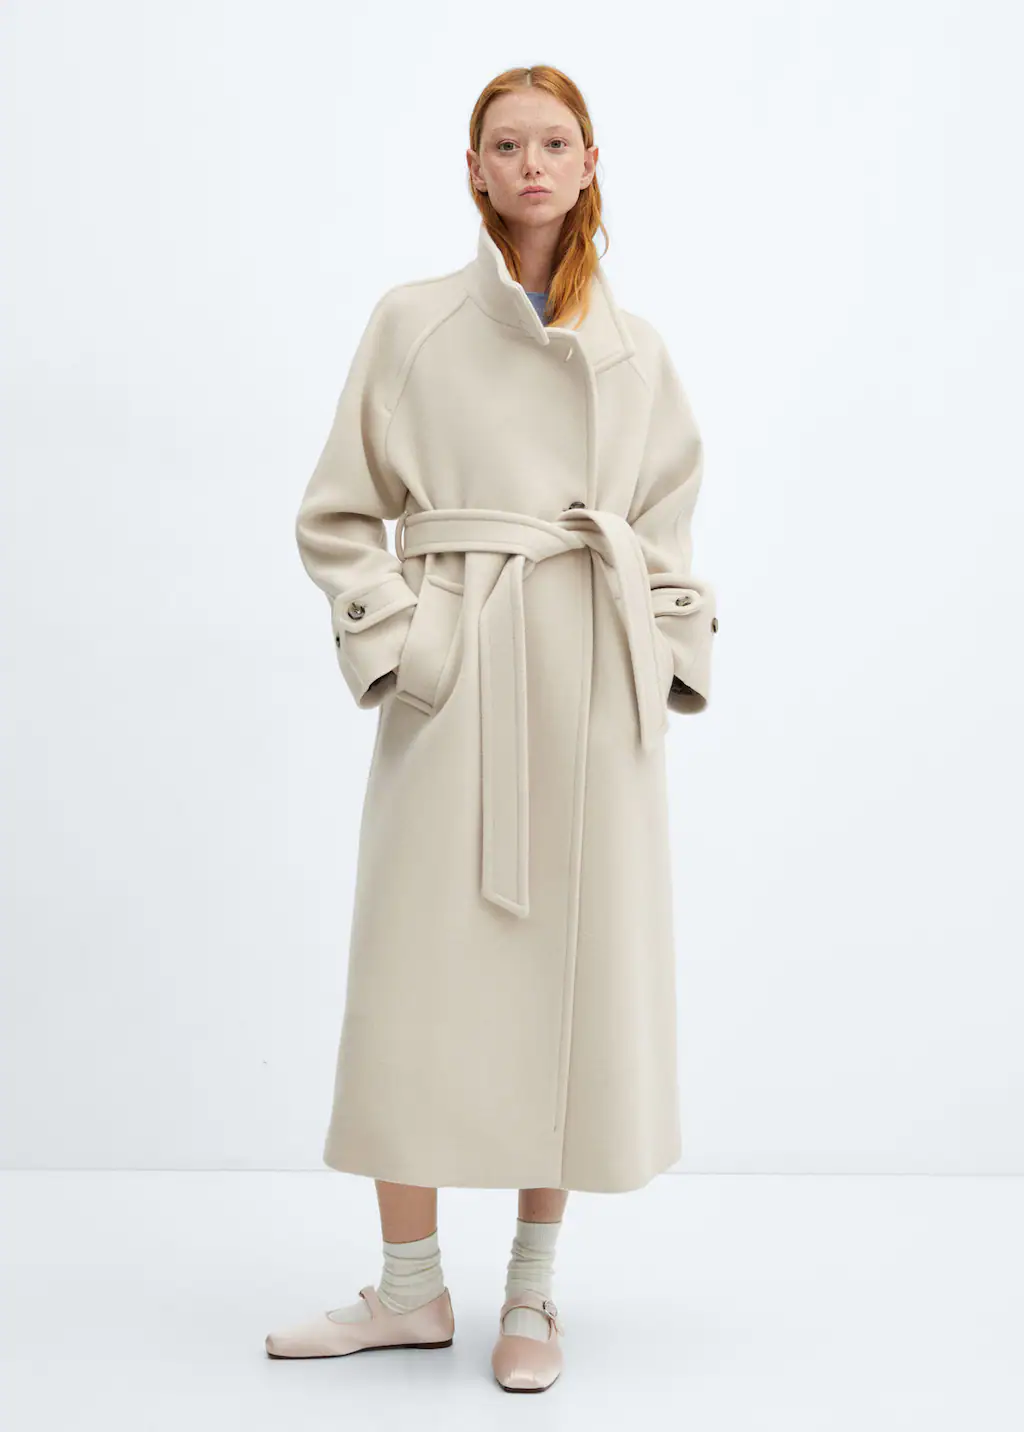 Mango cream coat. Premium quality. Virgin wool blend fabric. Long design. Straight design. Turtleneck. Long sleeve with buttoned cuffs. Two side pockets. Front button closure. Ribbon on the waist with tie closure. Back-slit hem. Loops. Inner lining.